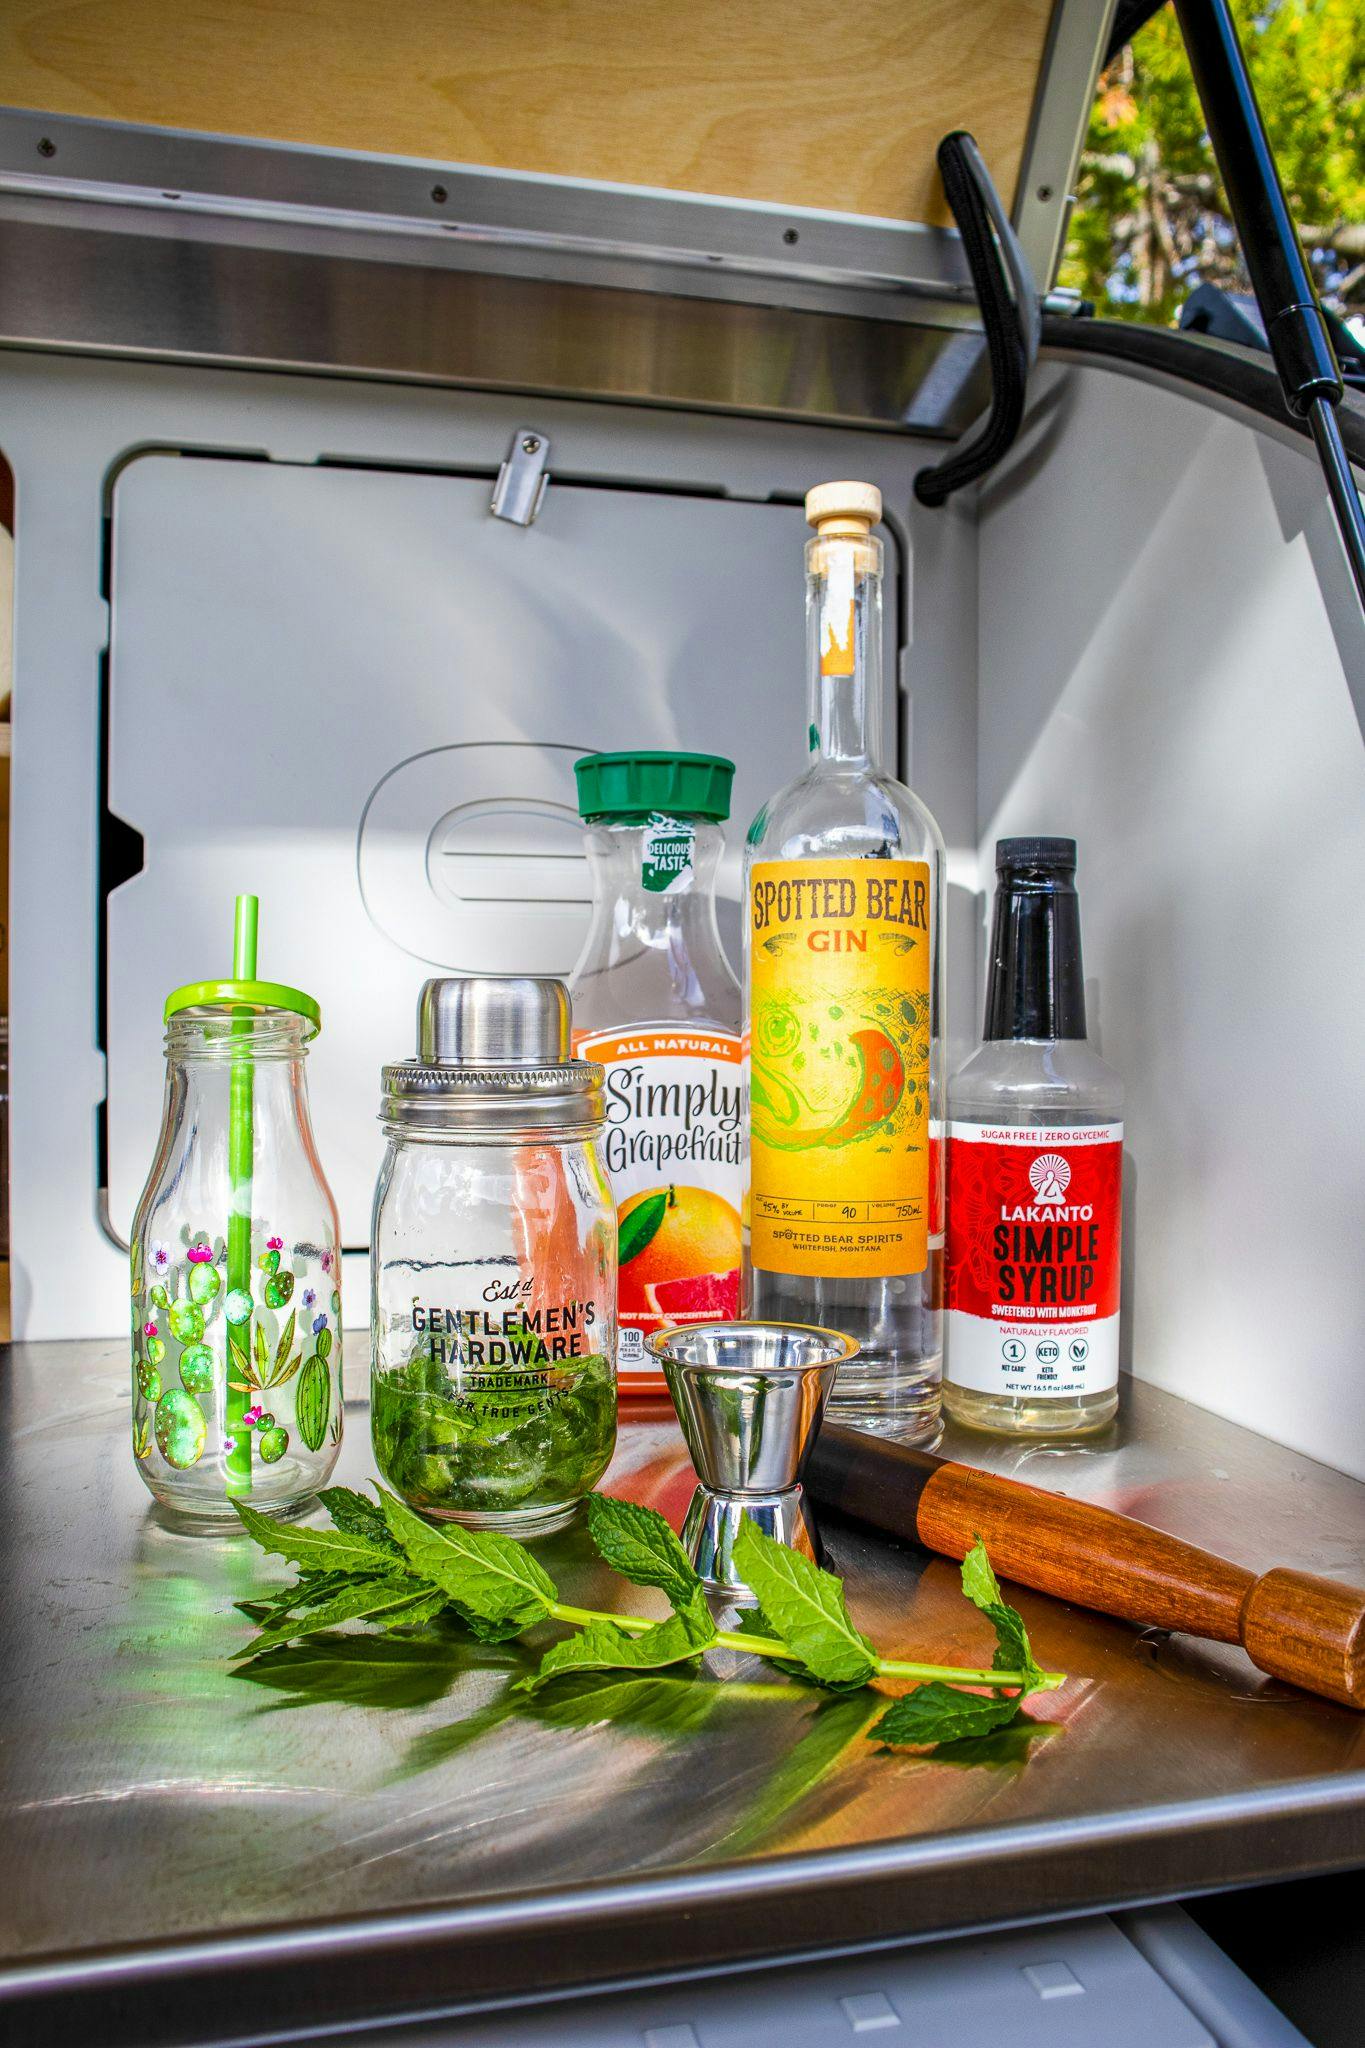 The ingredients required to make a ruby gin cocktail in the back of a teardrop camper!